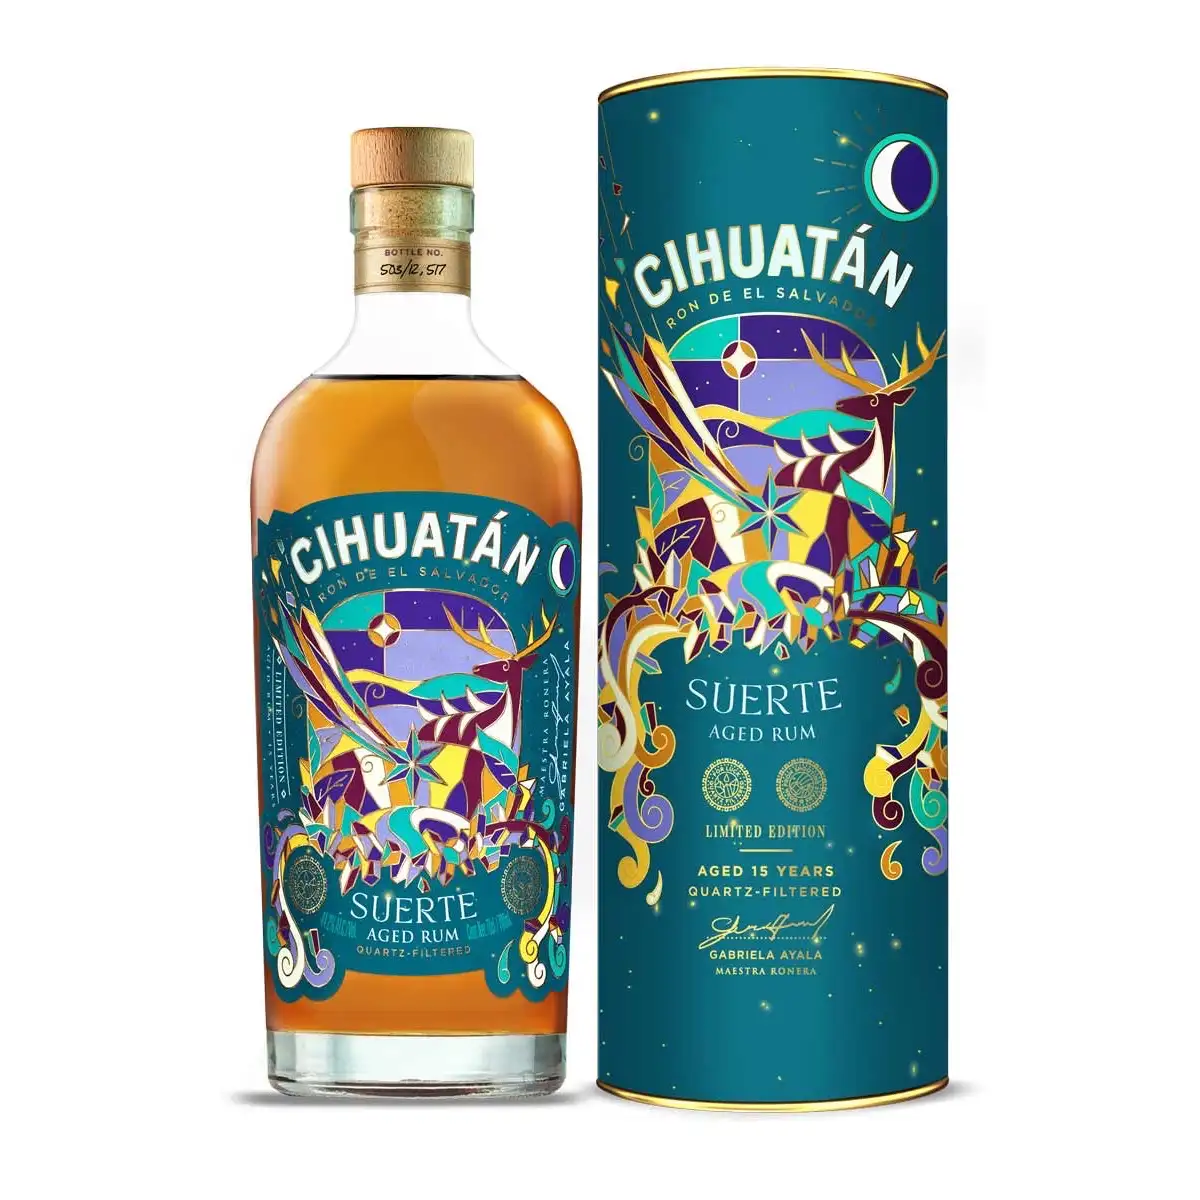 Image of the front of the bottle of the rum Cihuatán Suerte Aged Rum